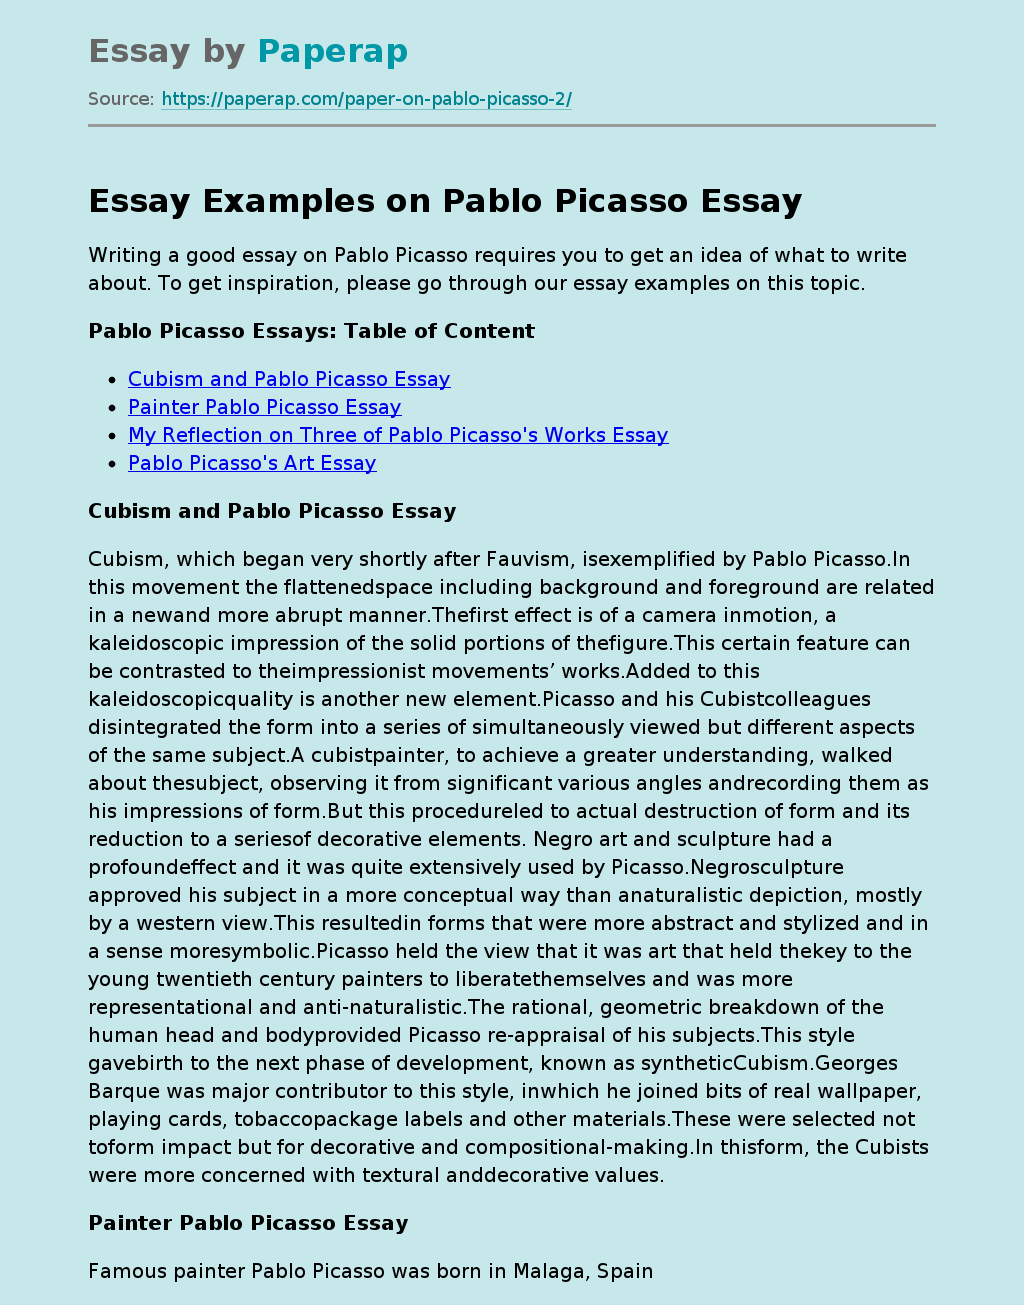 Essay Examples on Pablo Picasso